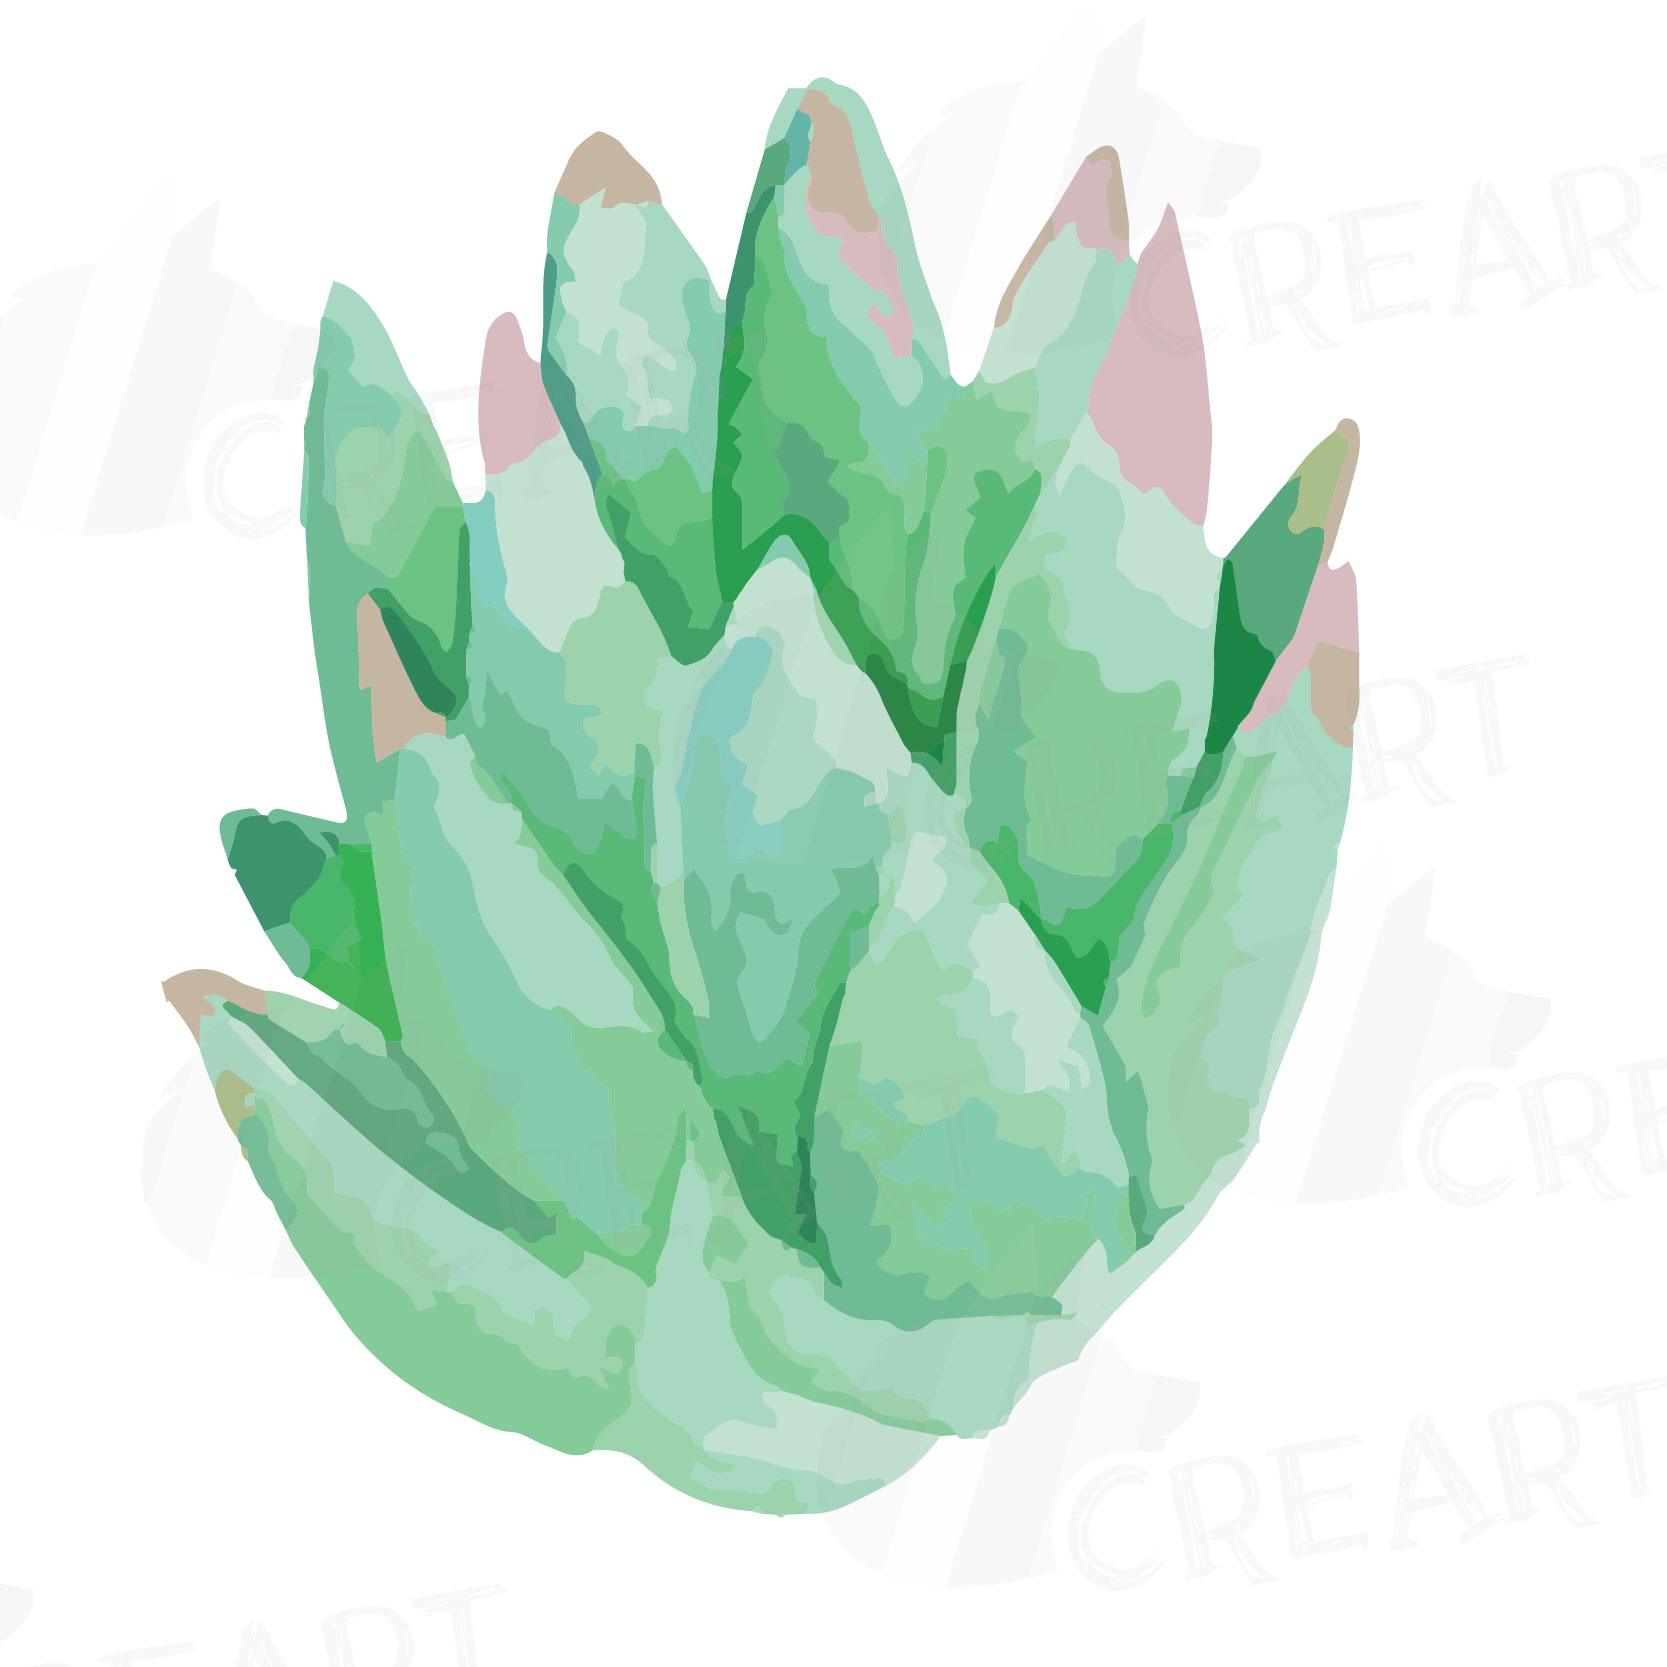 Succulent clipart small, Succulent small Transparent FREE for download